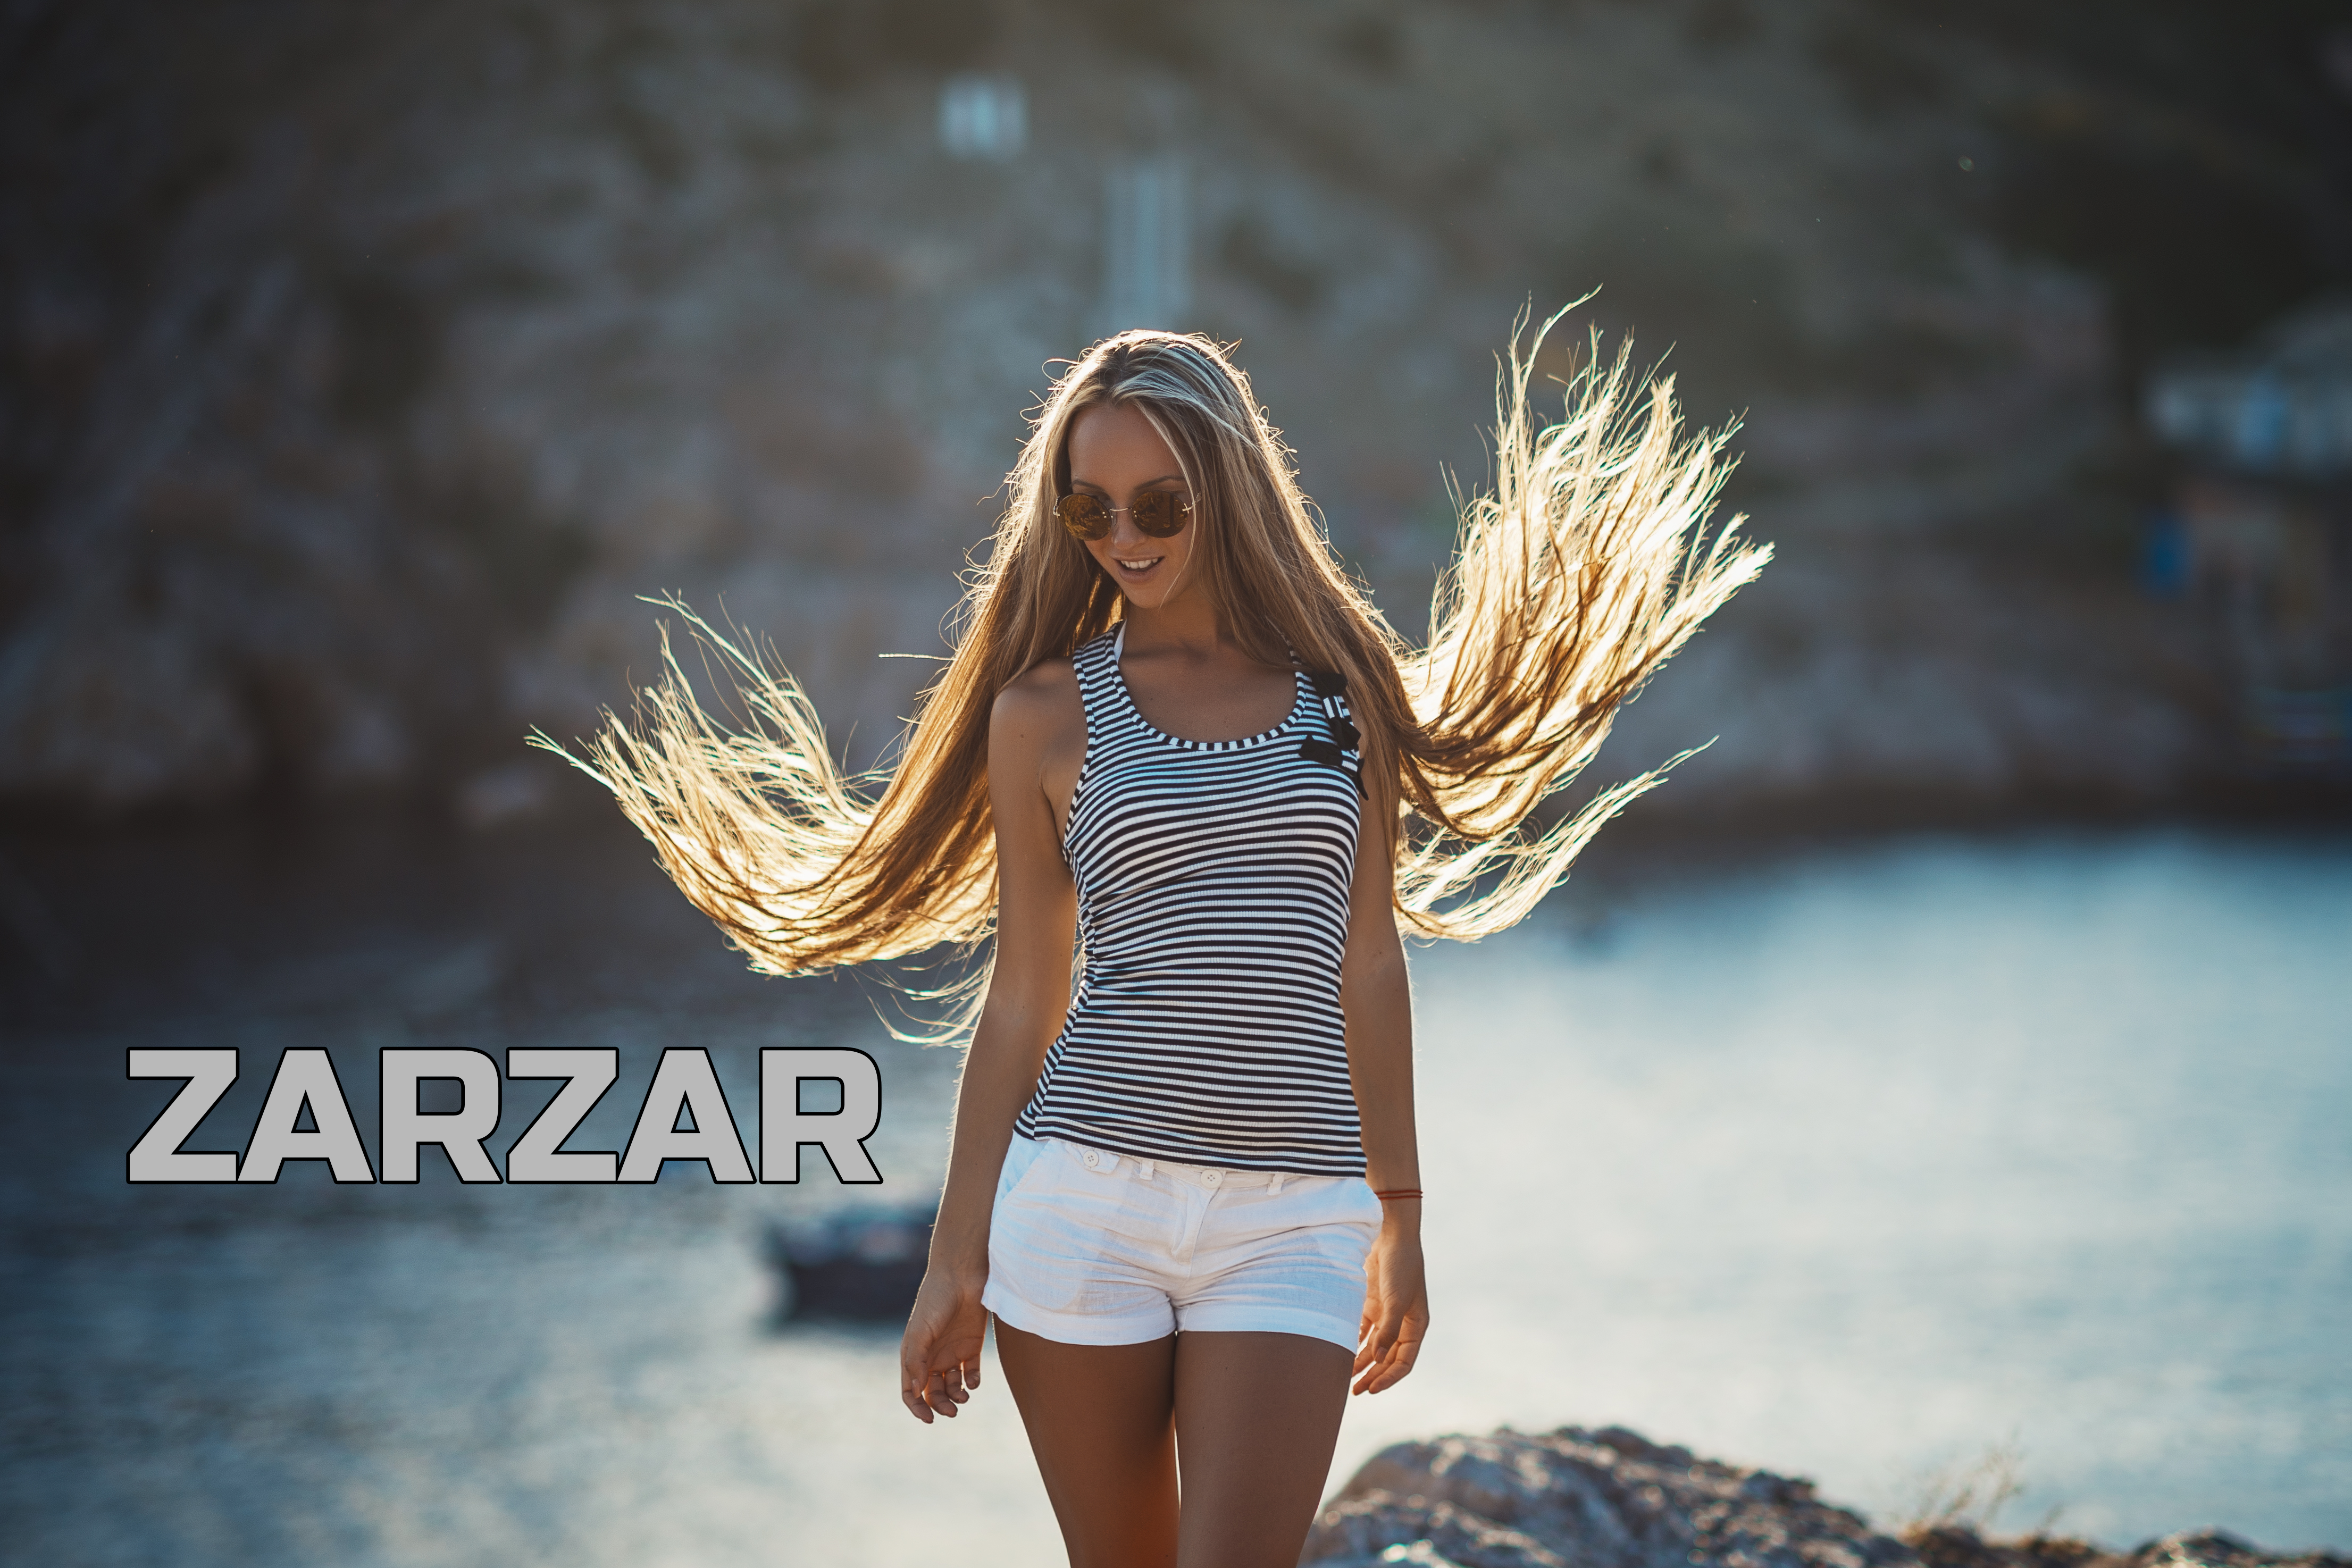 ZARZAR MODELS Top Modeling Agency For Fashion Models – Individual Retirement Accounts For Fashion Models & Actresses For Tax Free Income